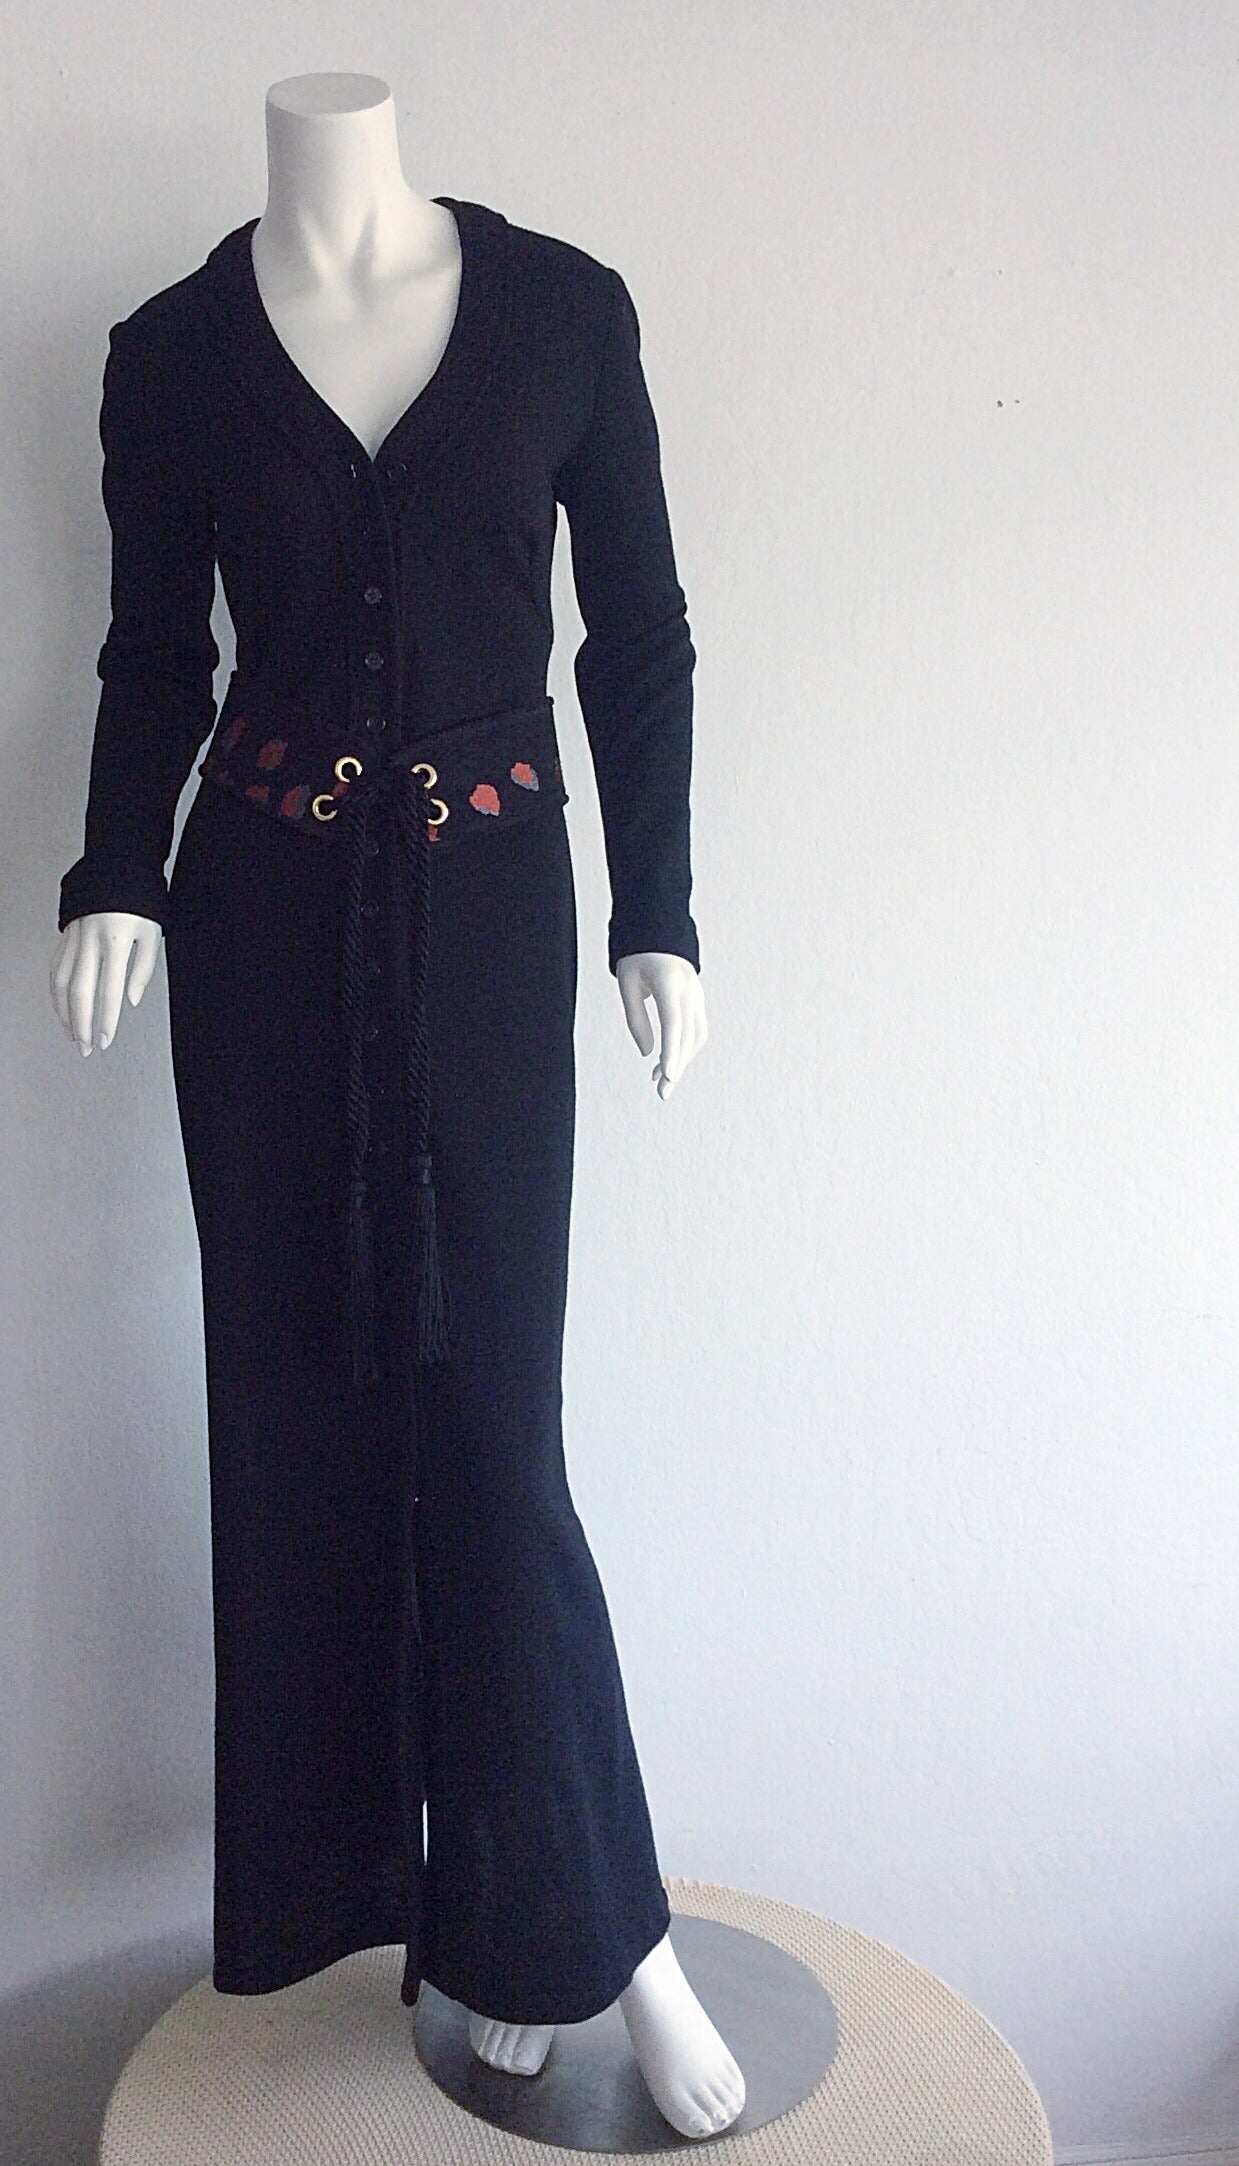 Incredible Vintage Mary Quant for Bonwit Teller Black Wool Shirt Dress 5